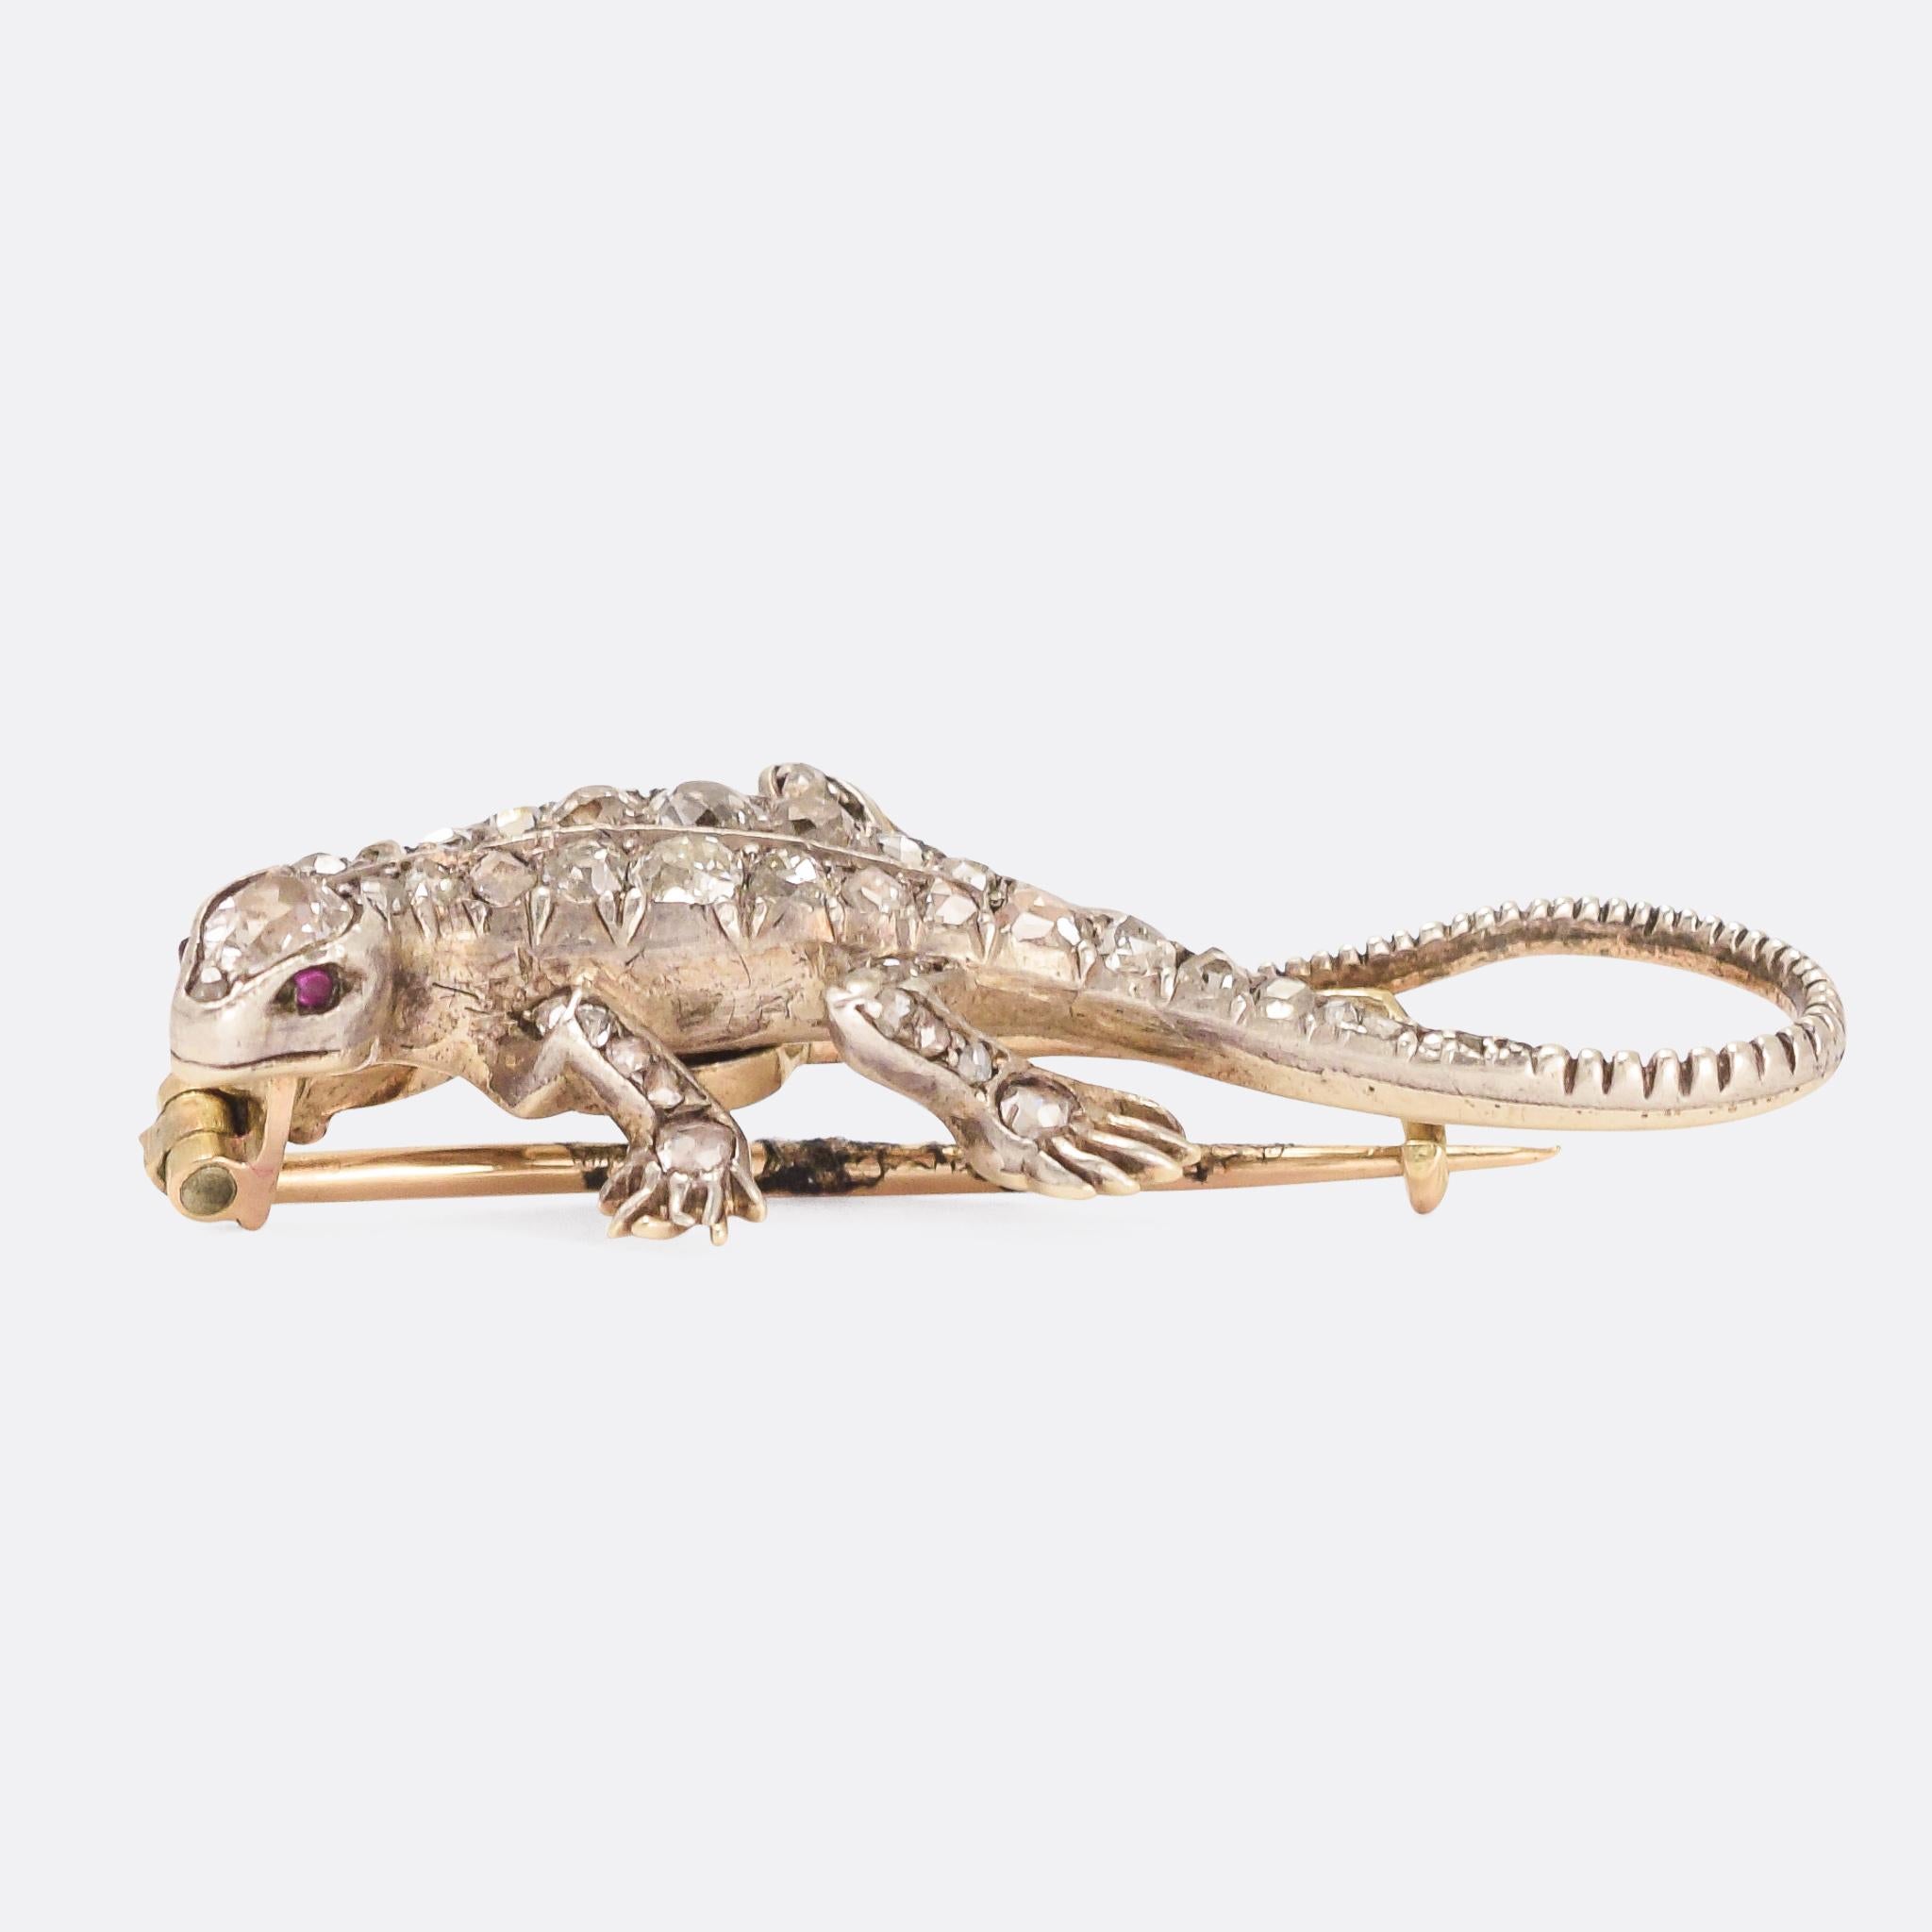 An adorable antique lizard brooch studded with rose and old mine cut diamonds and with ruby eyes. It was made in the latter half of the 19th Century, circa 1880, with finely detailed features - particularly the face, feet, and tail. Modelled in 9